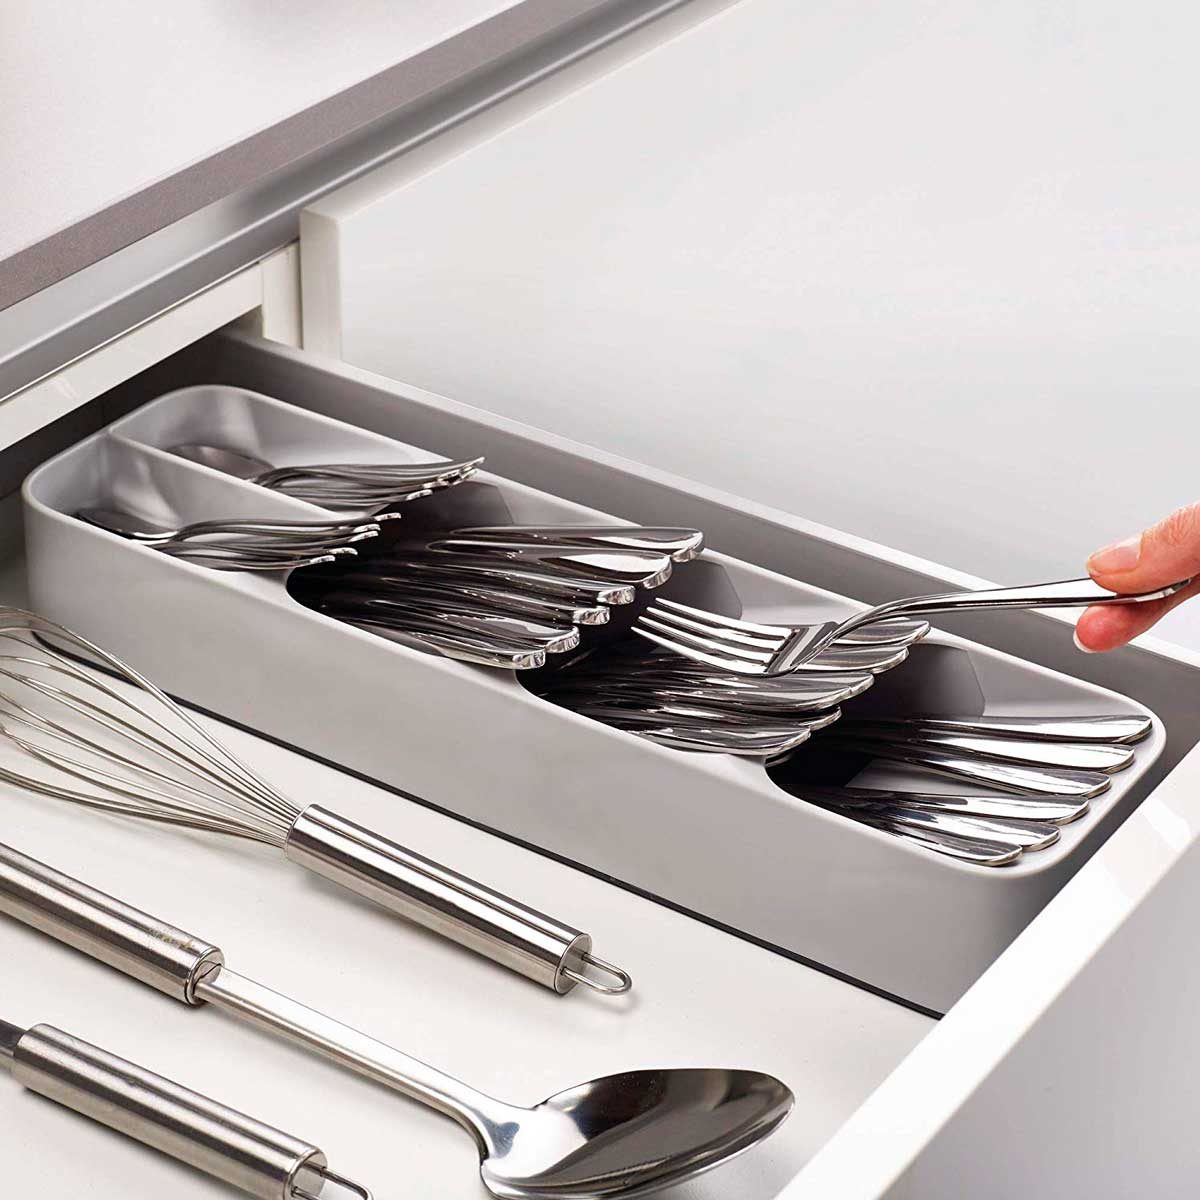 Kitchen Drawer Organizer. Cutlery Tray According to Your Size. Organizer  With Knife Insert 2 Big and 3 Small Knives. 